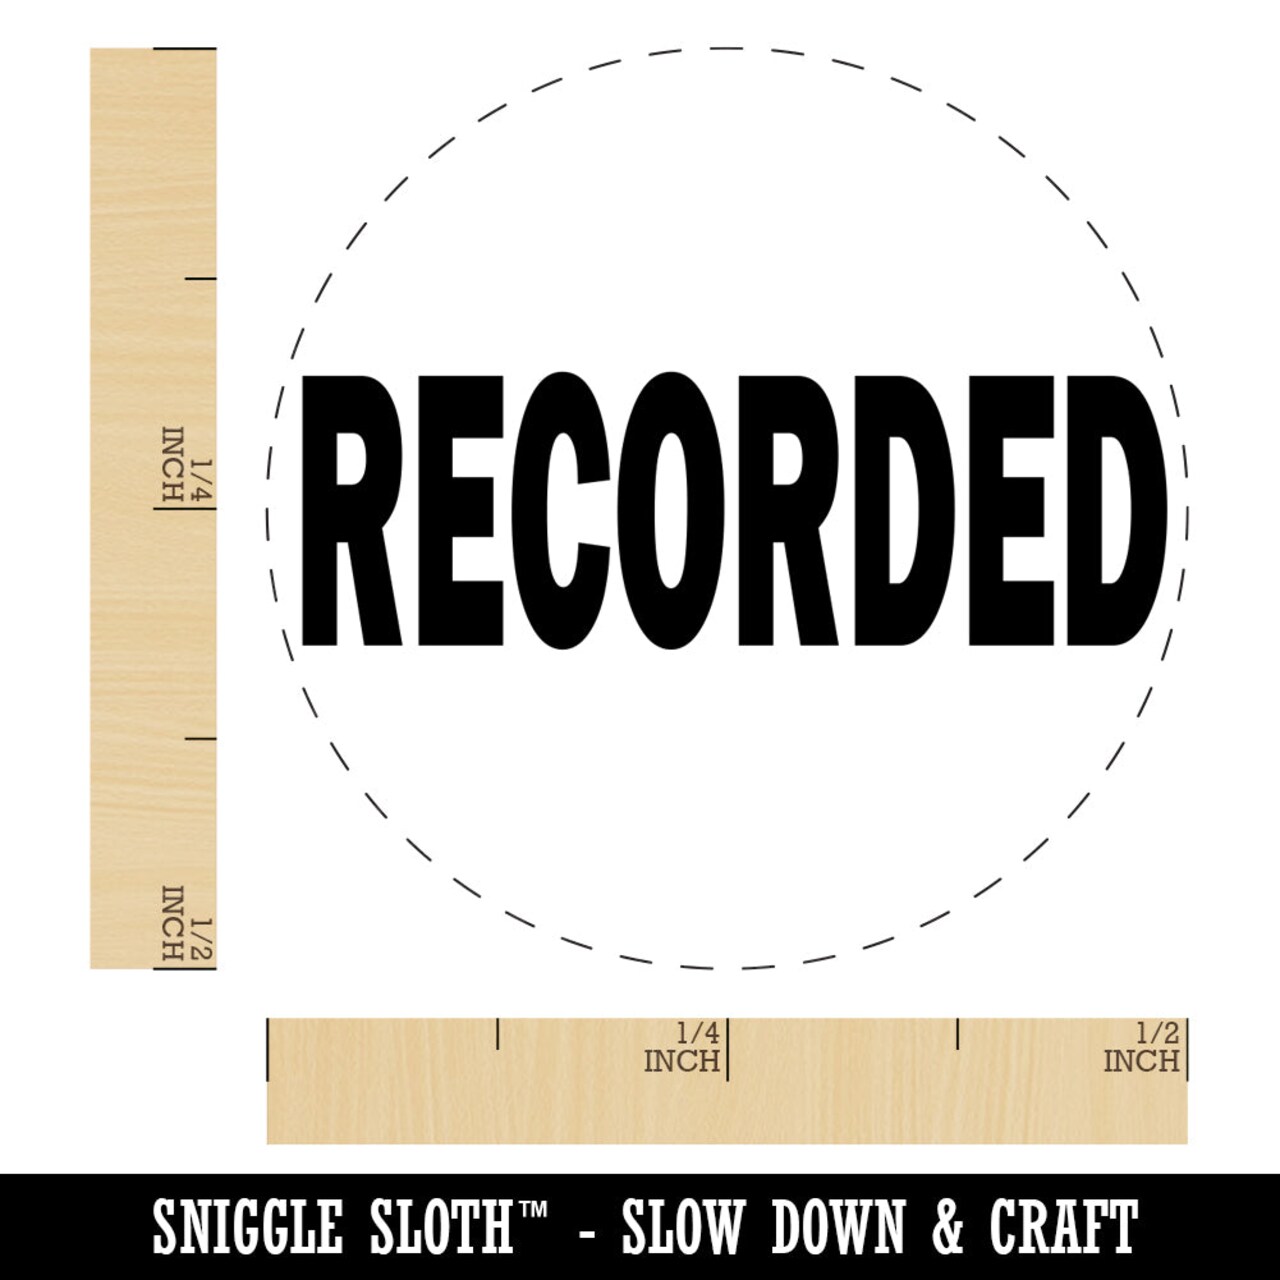 Recorded Text Self-Inking Rubber Stamp for Stamping Crafting Planners